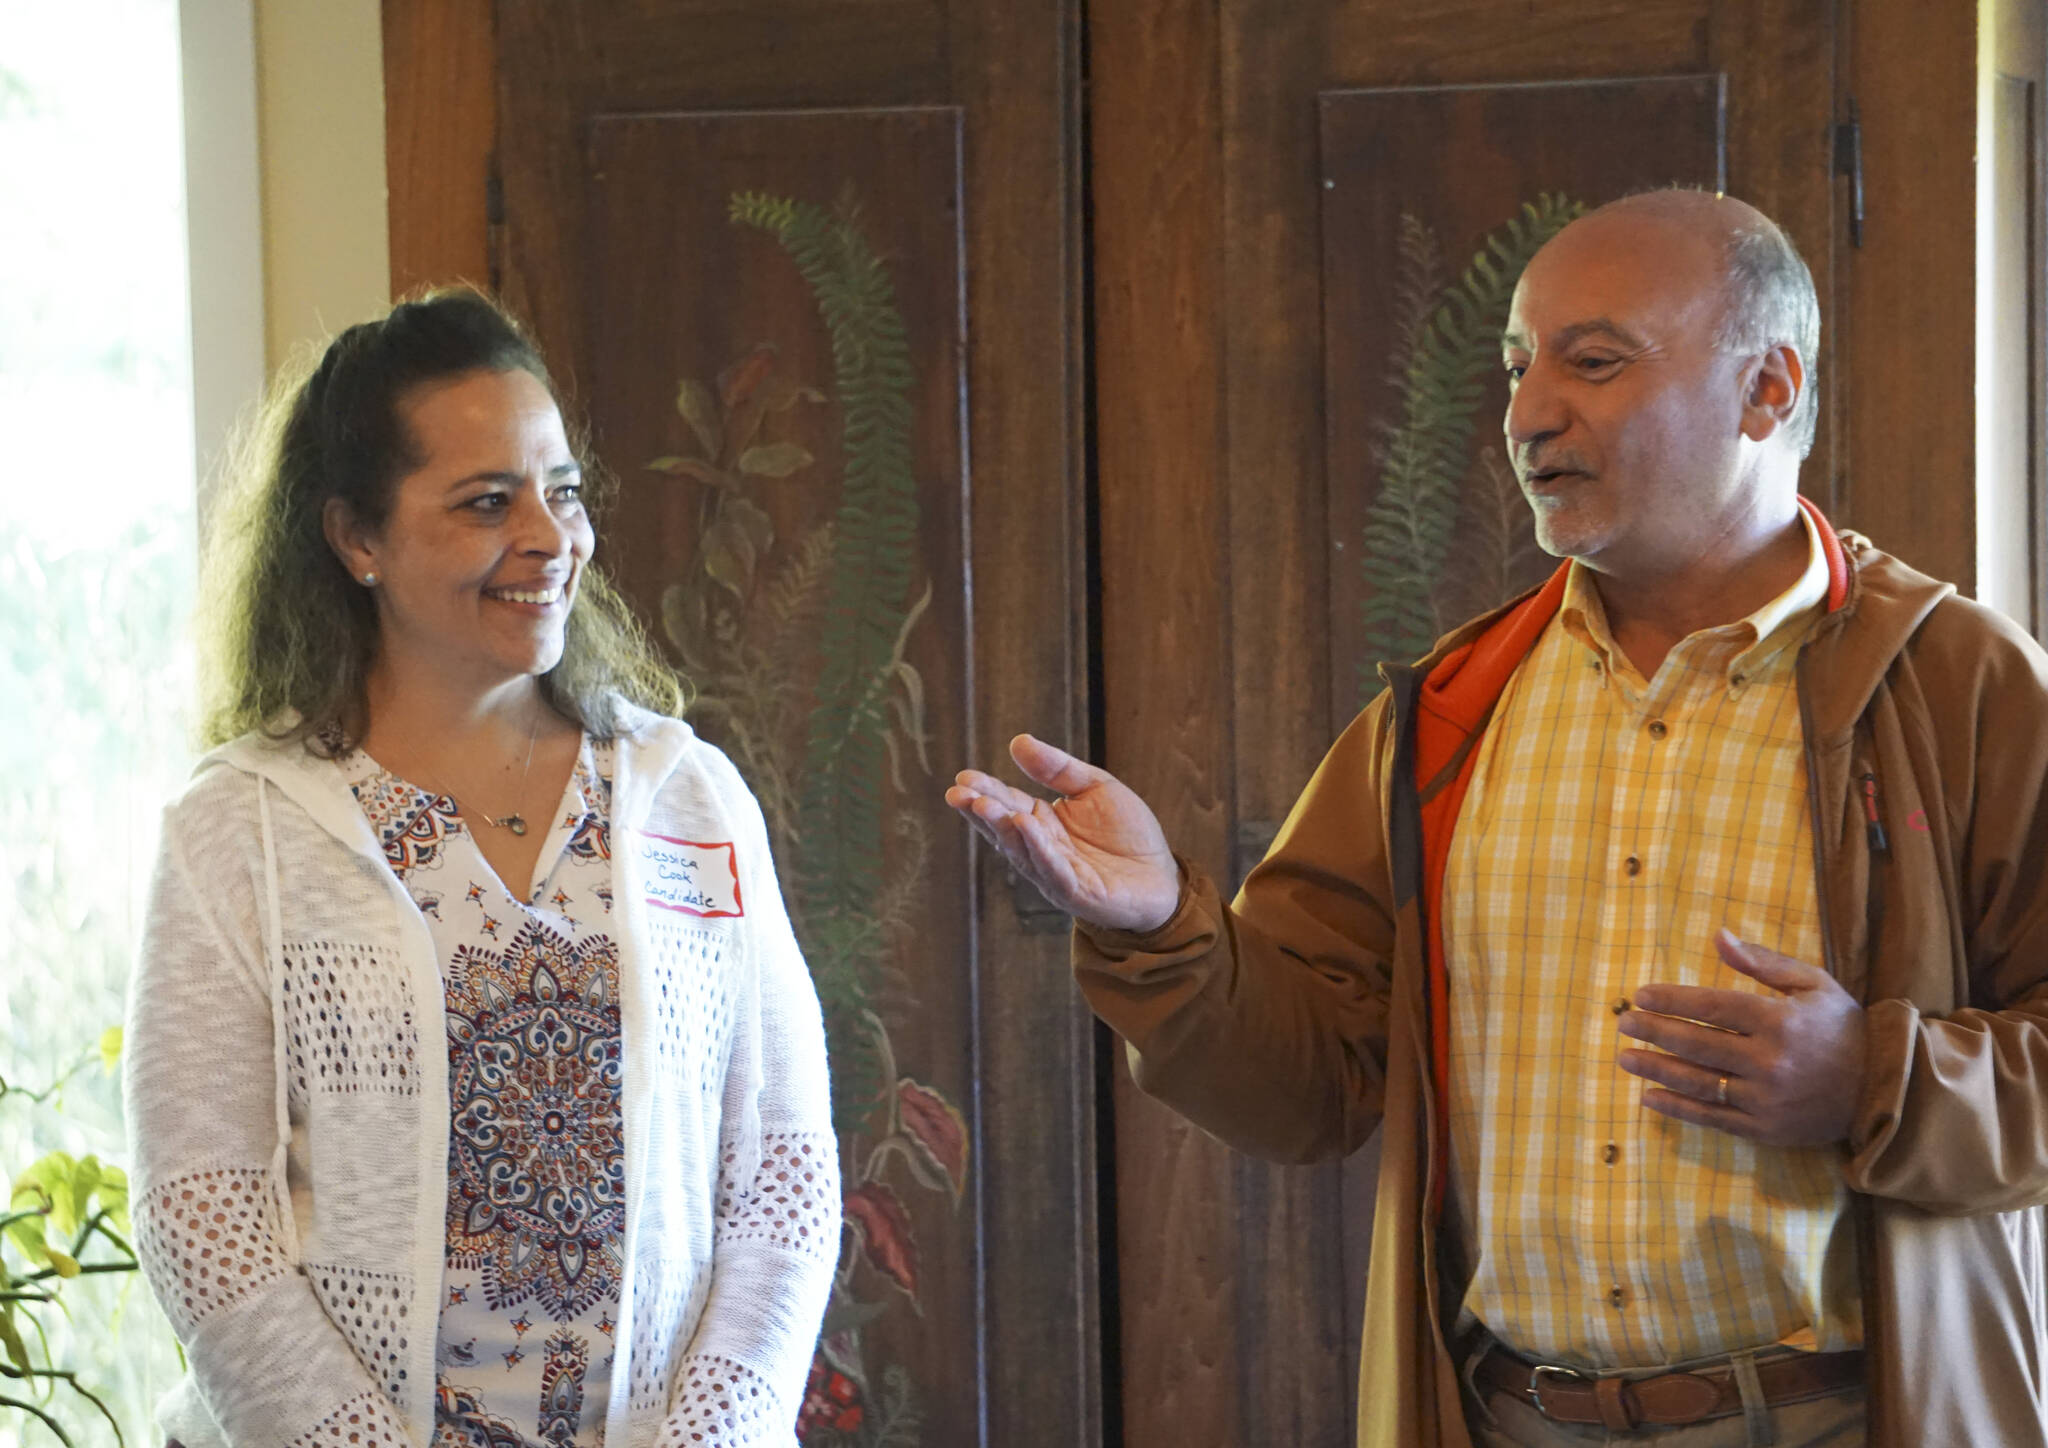 Democratic Party candidate for lieutenant governor Jessica Cook, left, listens while candidate for governor Les Gara, right, speaks at a meet-and-greet event on Thursday, June 2, 2022, in Homer, Alaska. (Photo by Michael Armstrong/Homer News)